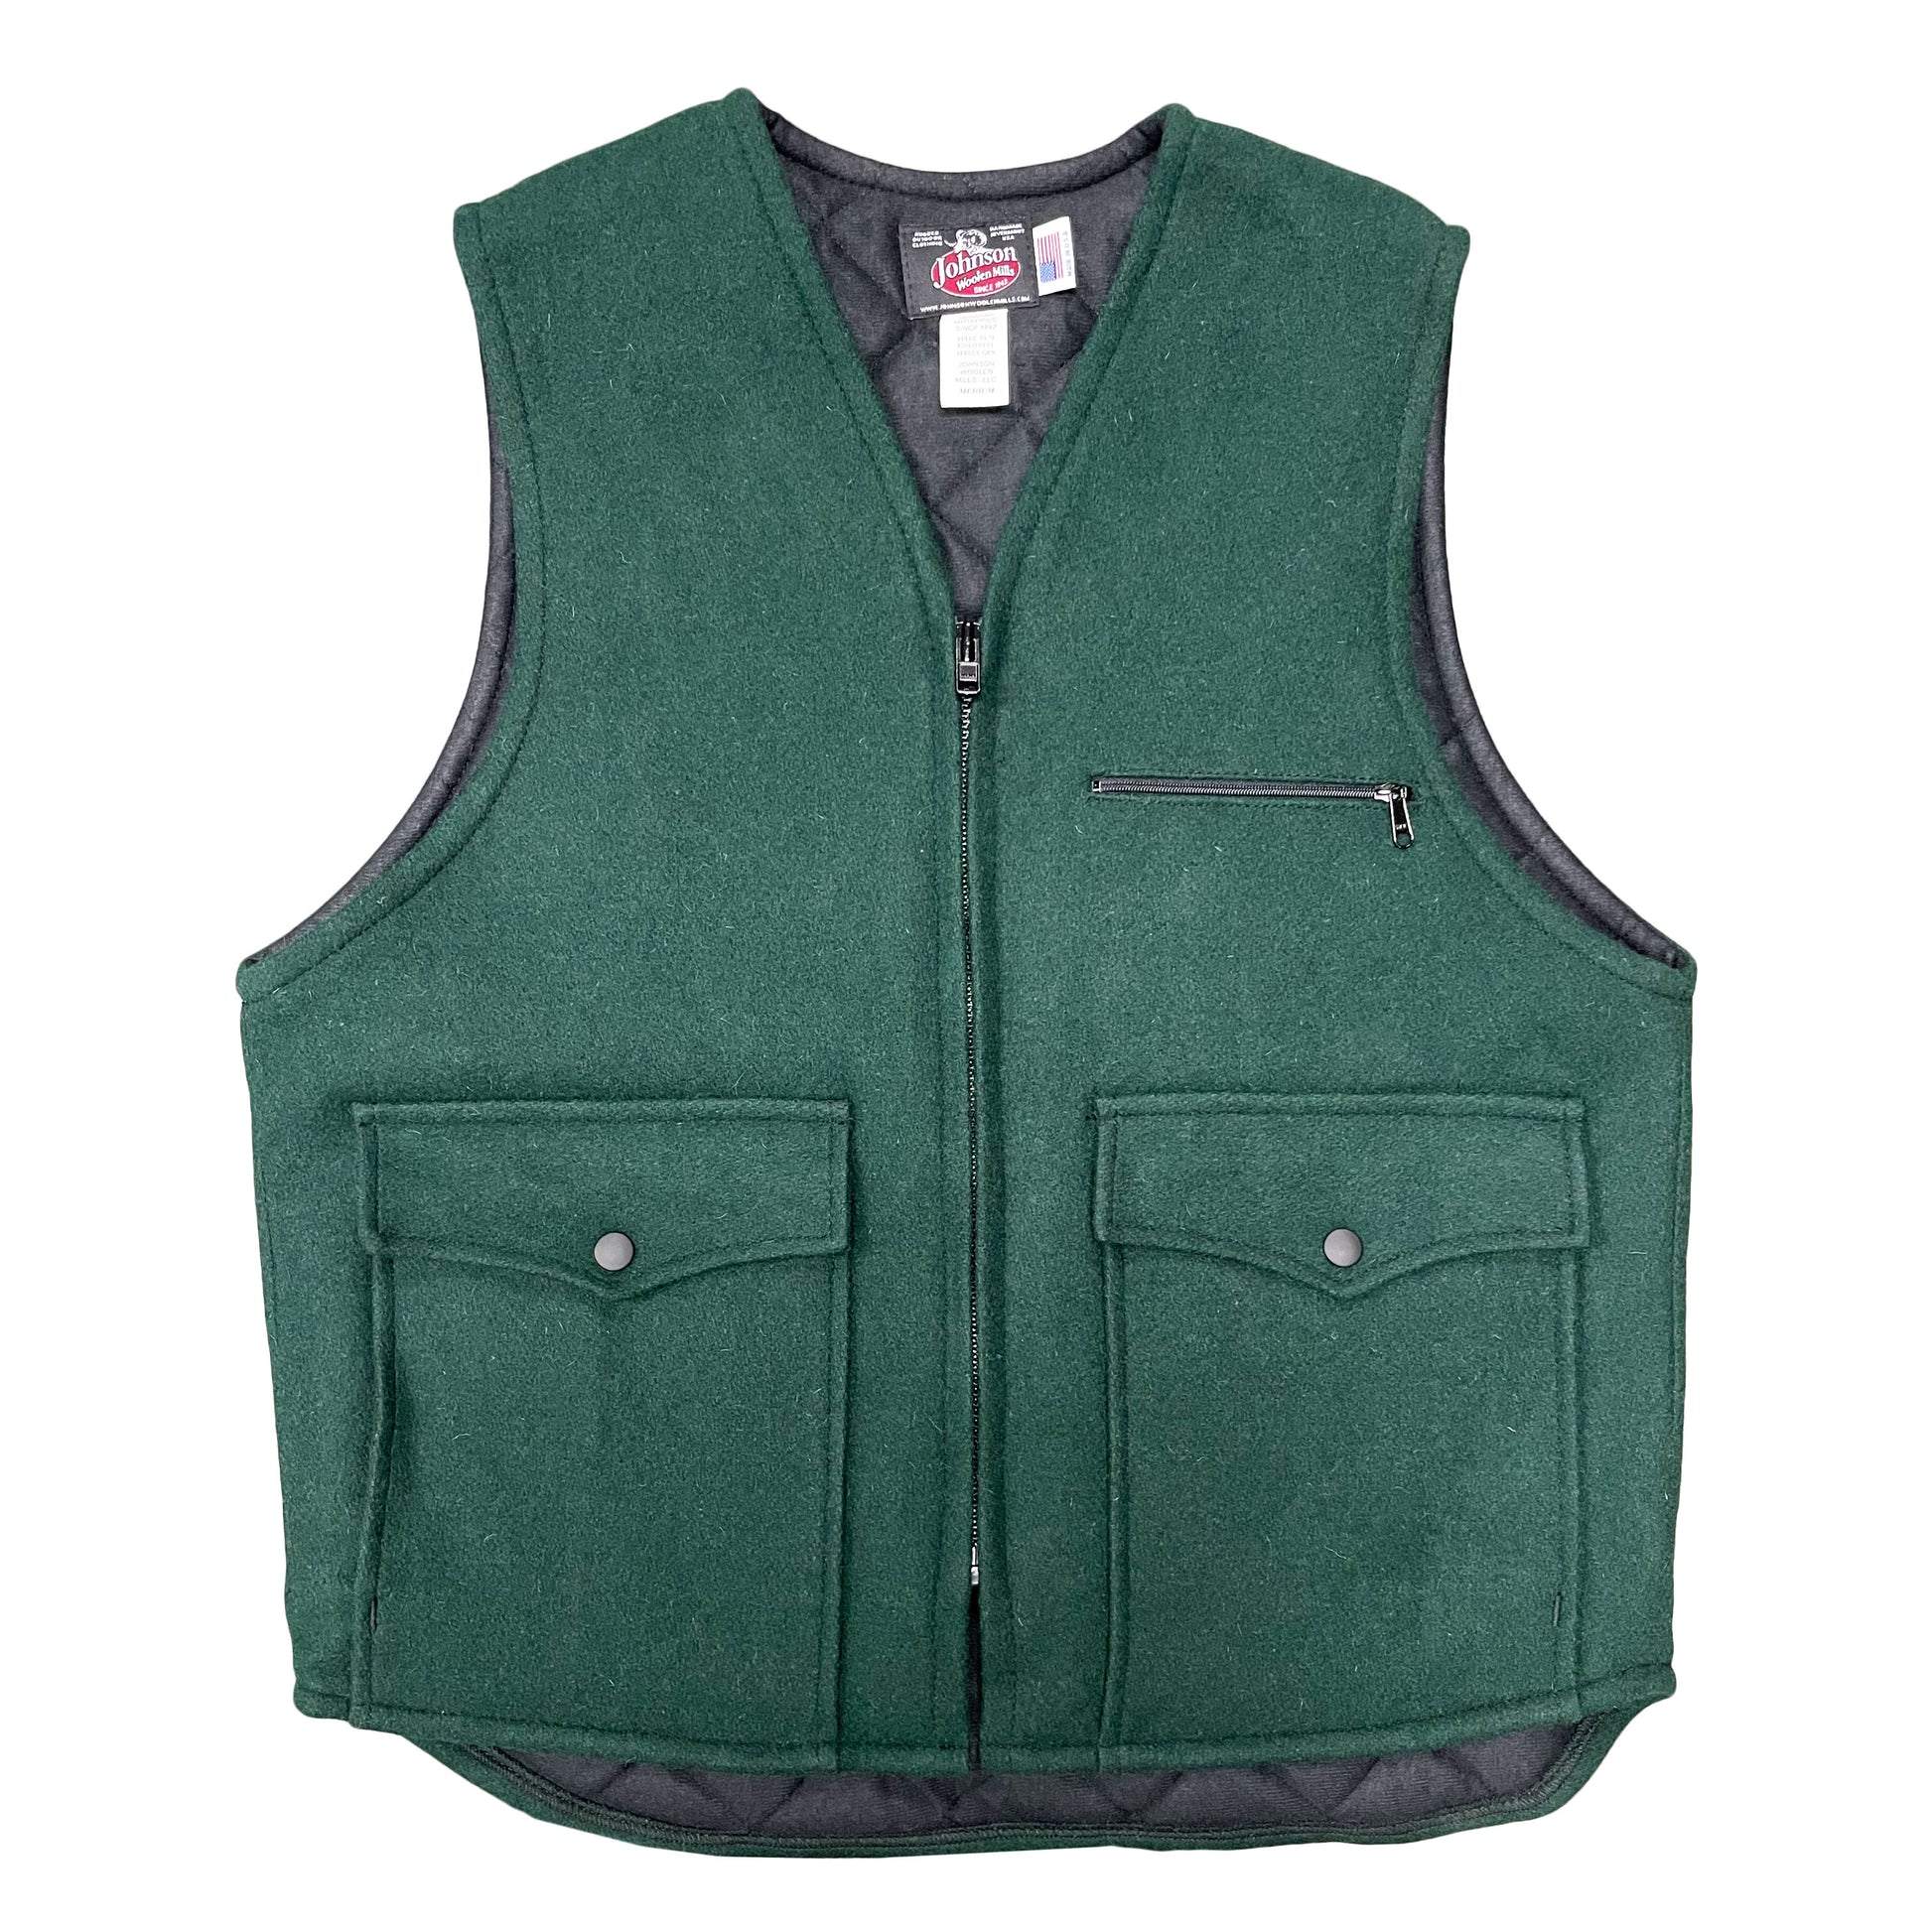 Vest with tricot lining, spruce green, zipper front, two large pockets and chest pocket, front view